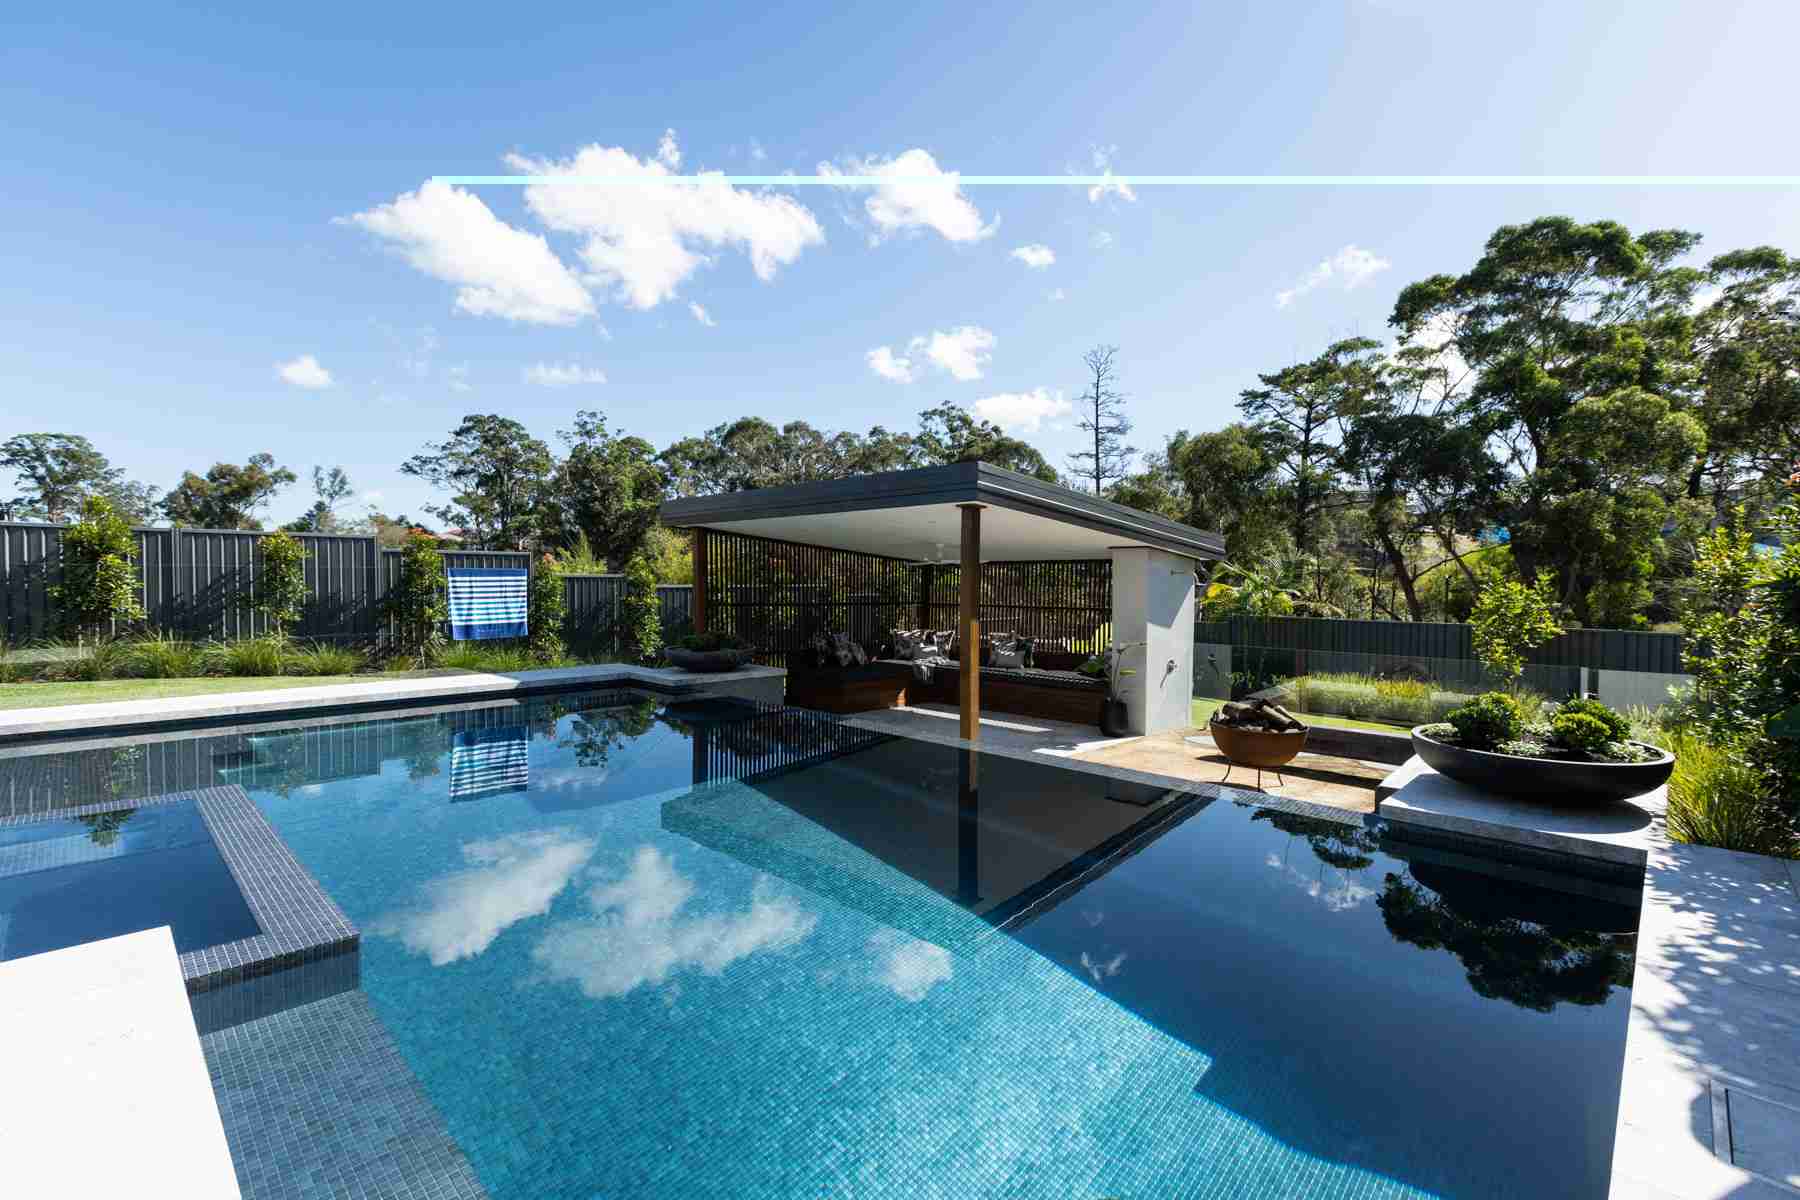 2023 NSW Best Concrete Pool award winner by Splish Splash Pools Pty Ltd, featuring a tropical oasis pool with a matt finish mosaic, generous spa, shallow area, and wet edge in a landscaped garden, complemented by decorative succulent bowls, an outdoor shower, entertaining area, and comfortable day beds shaded by timber screening.